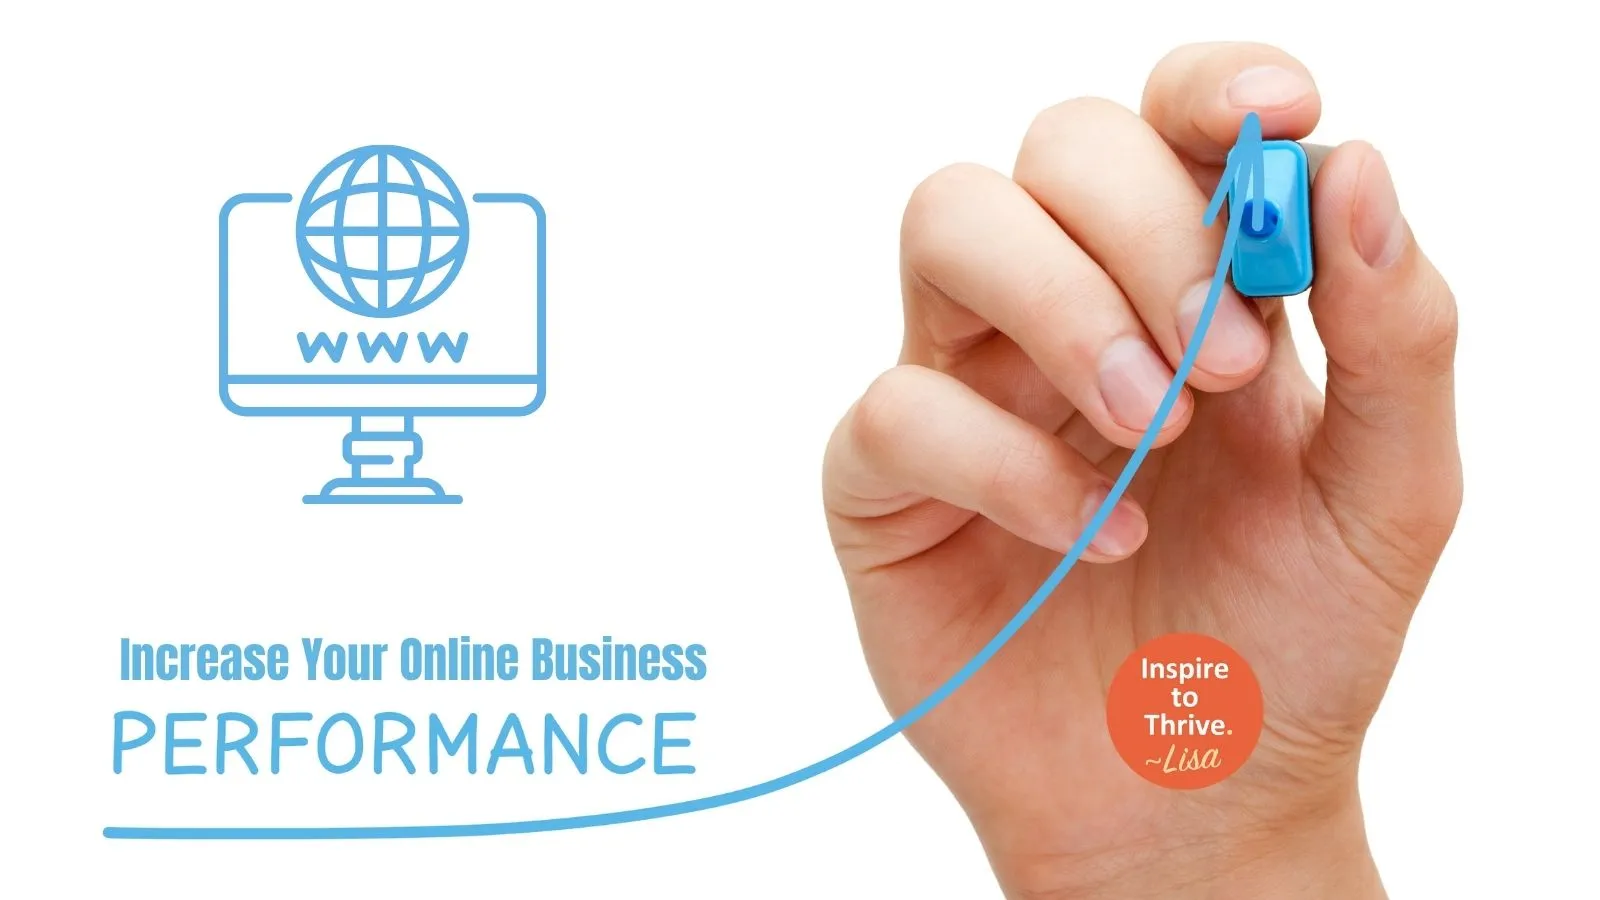 Increase your online business performance